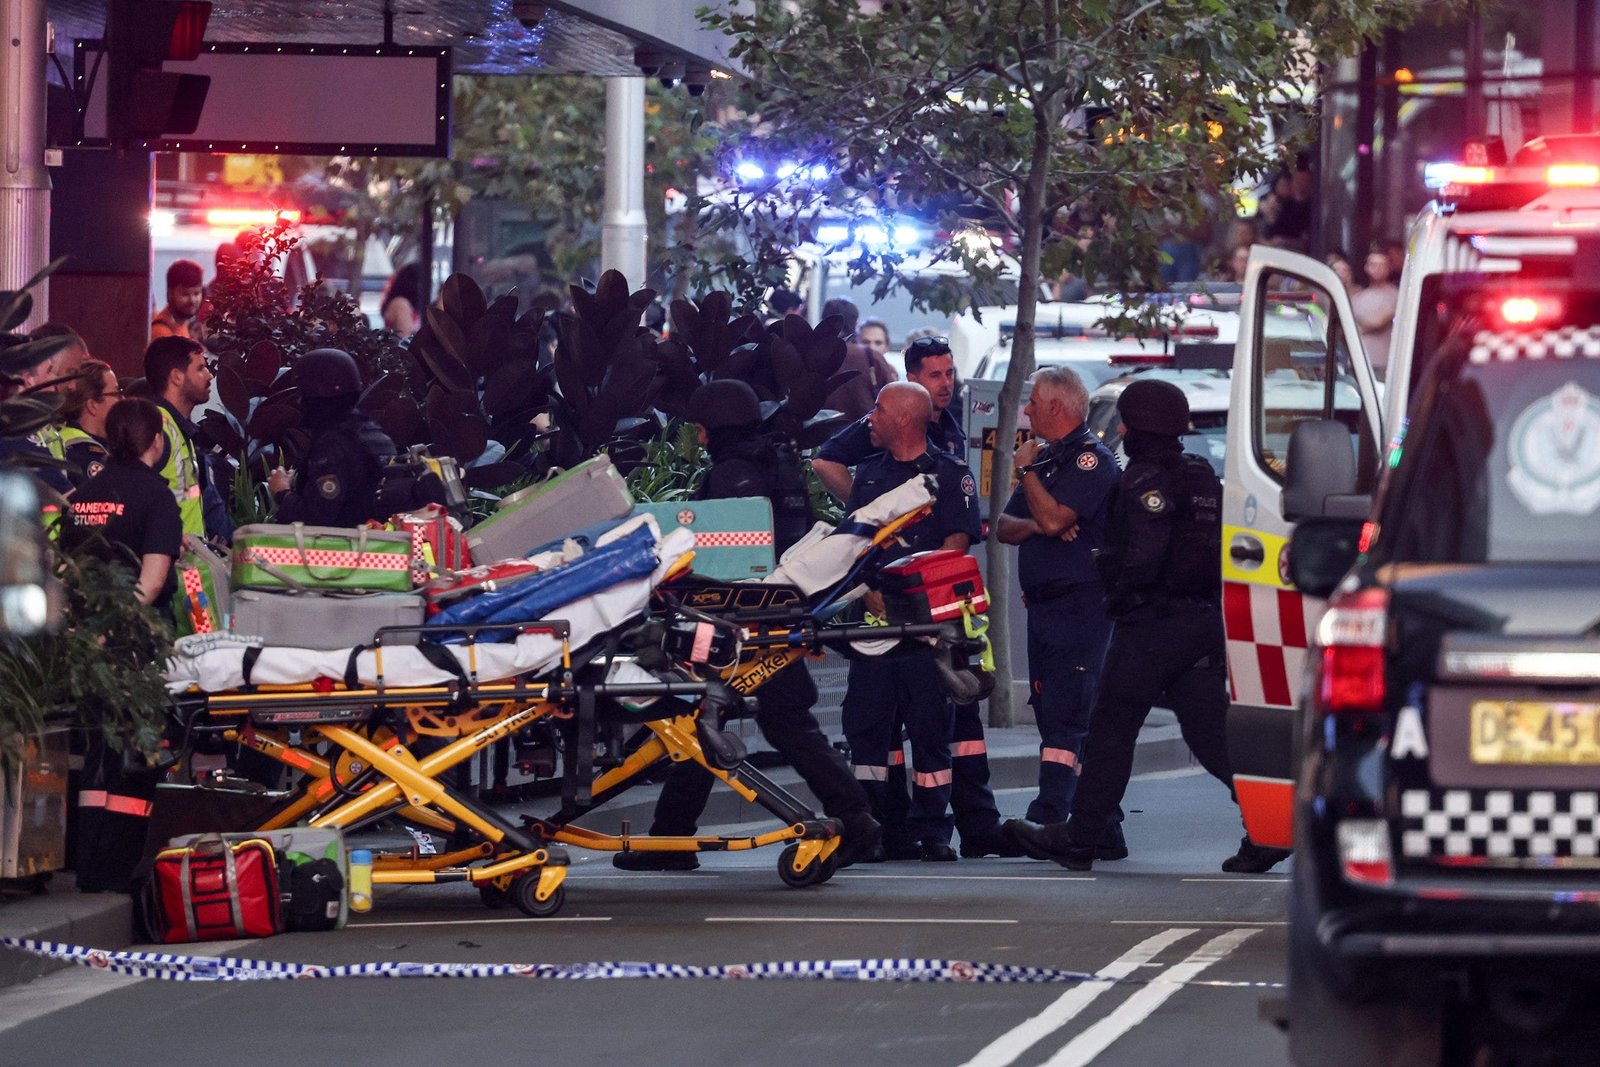 Six dead including suspect after stabbing spree at Australian shopping center